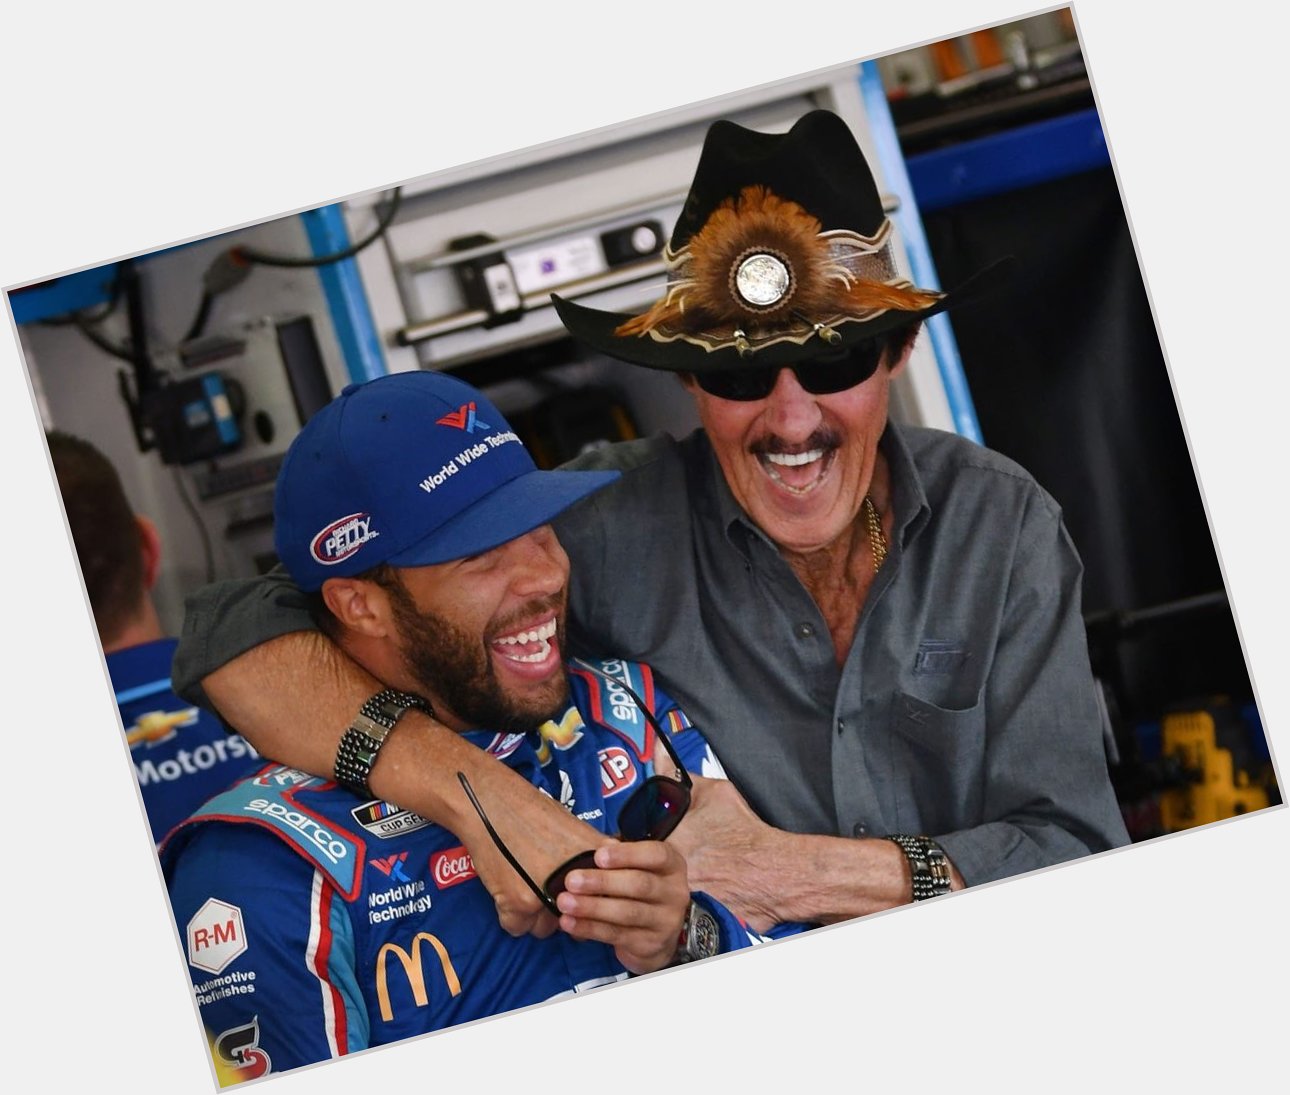 Happy 83rd Birthday, Richard Petty. Proof that thought can evolve with time and knowledge. An example for us all. 